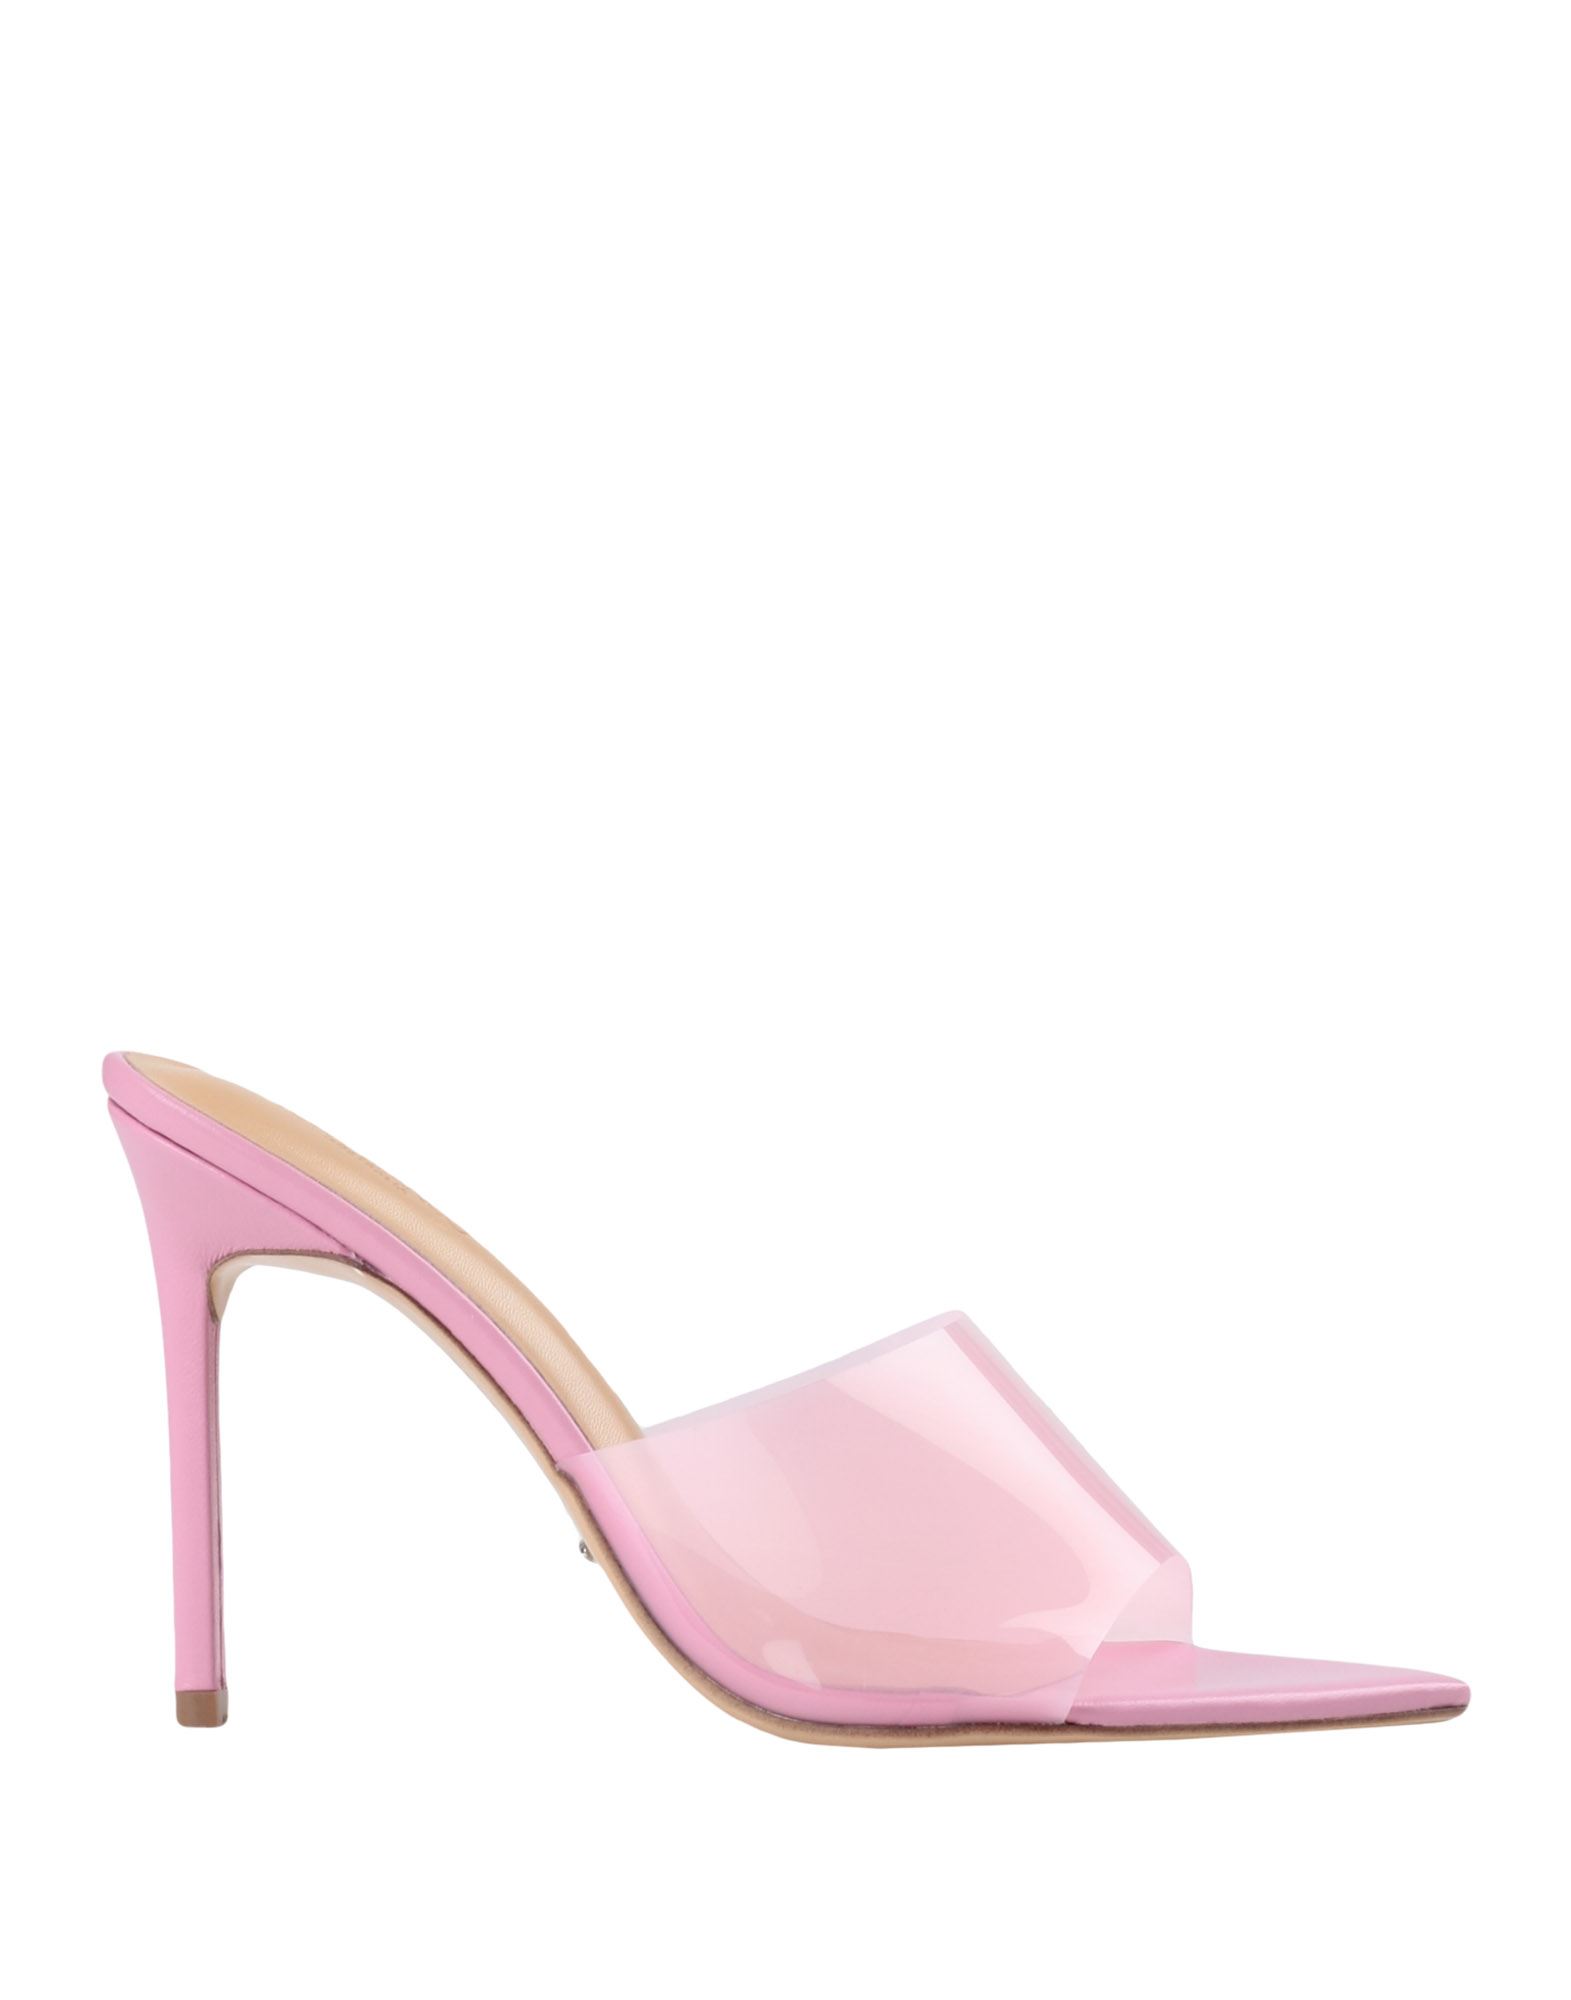 Tony Bianco Sandals In Pink